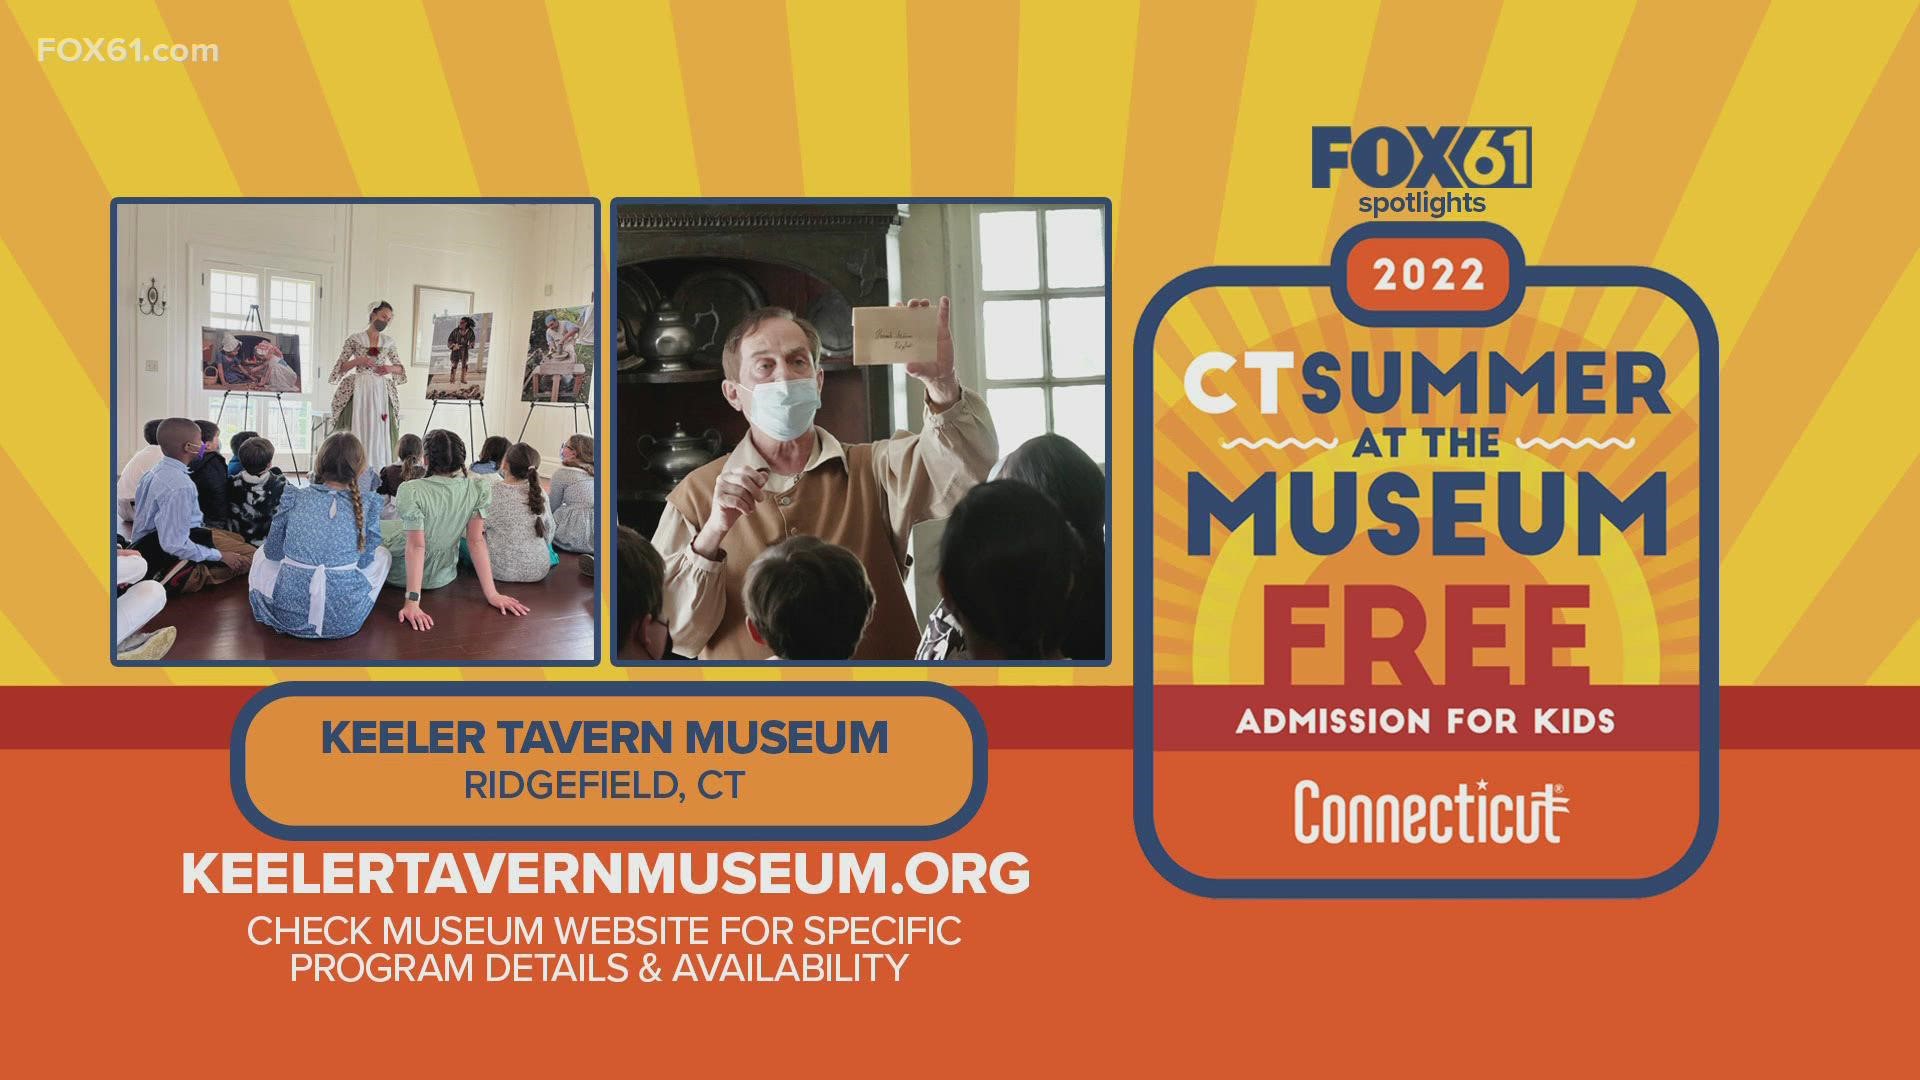 Kids 18 and under can visit the Keeler Tavern Museum & History Center in Ridgefield for free with an adult who is a resident of Connecticut. It runs through Sept. 5.